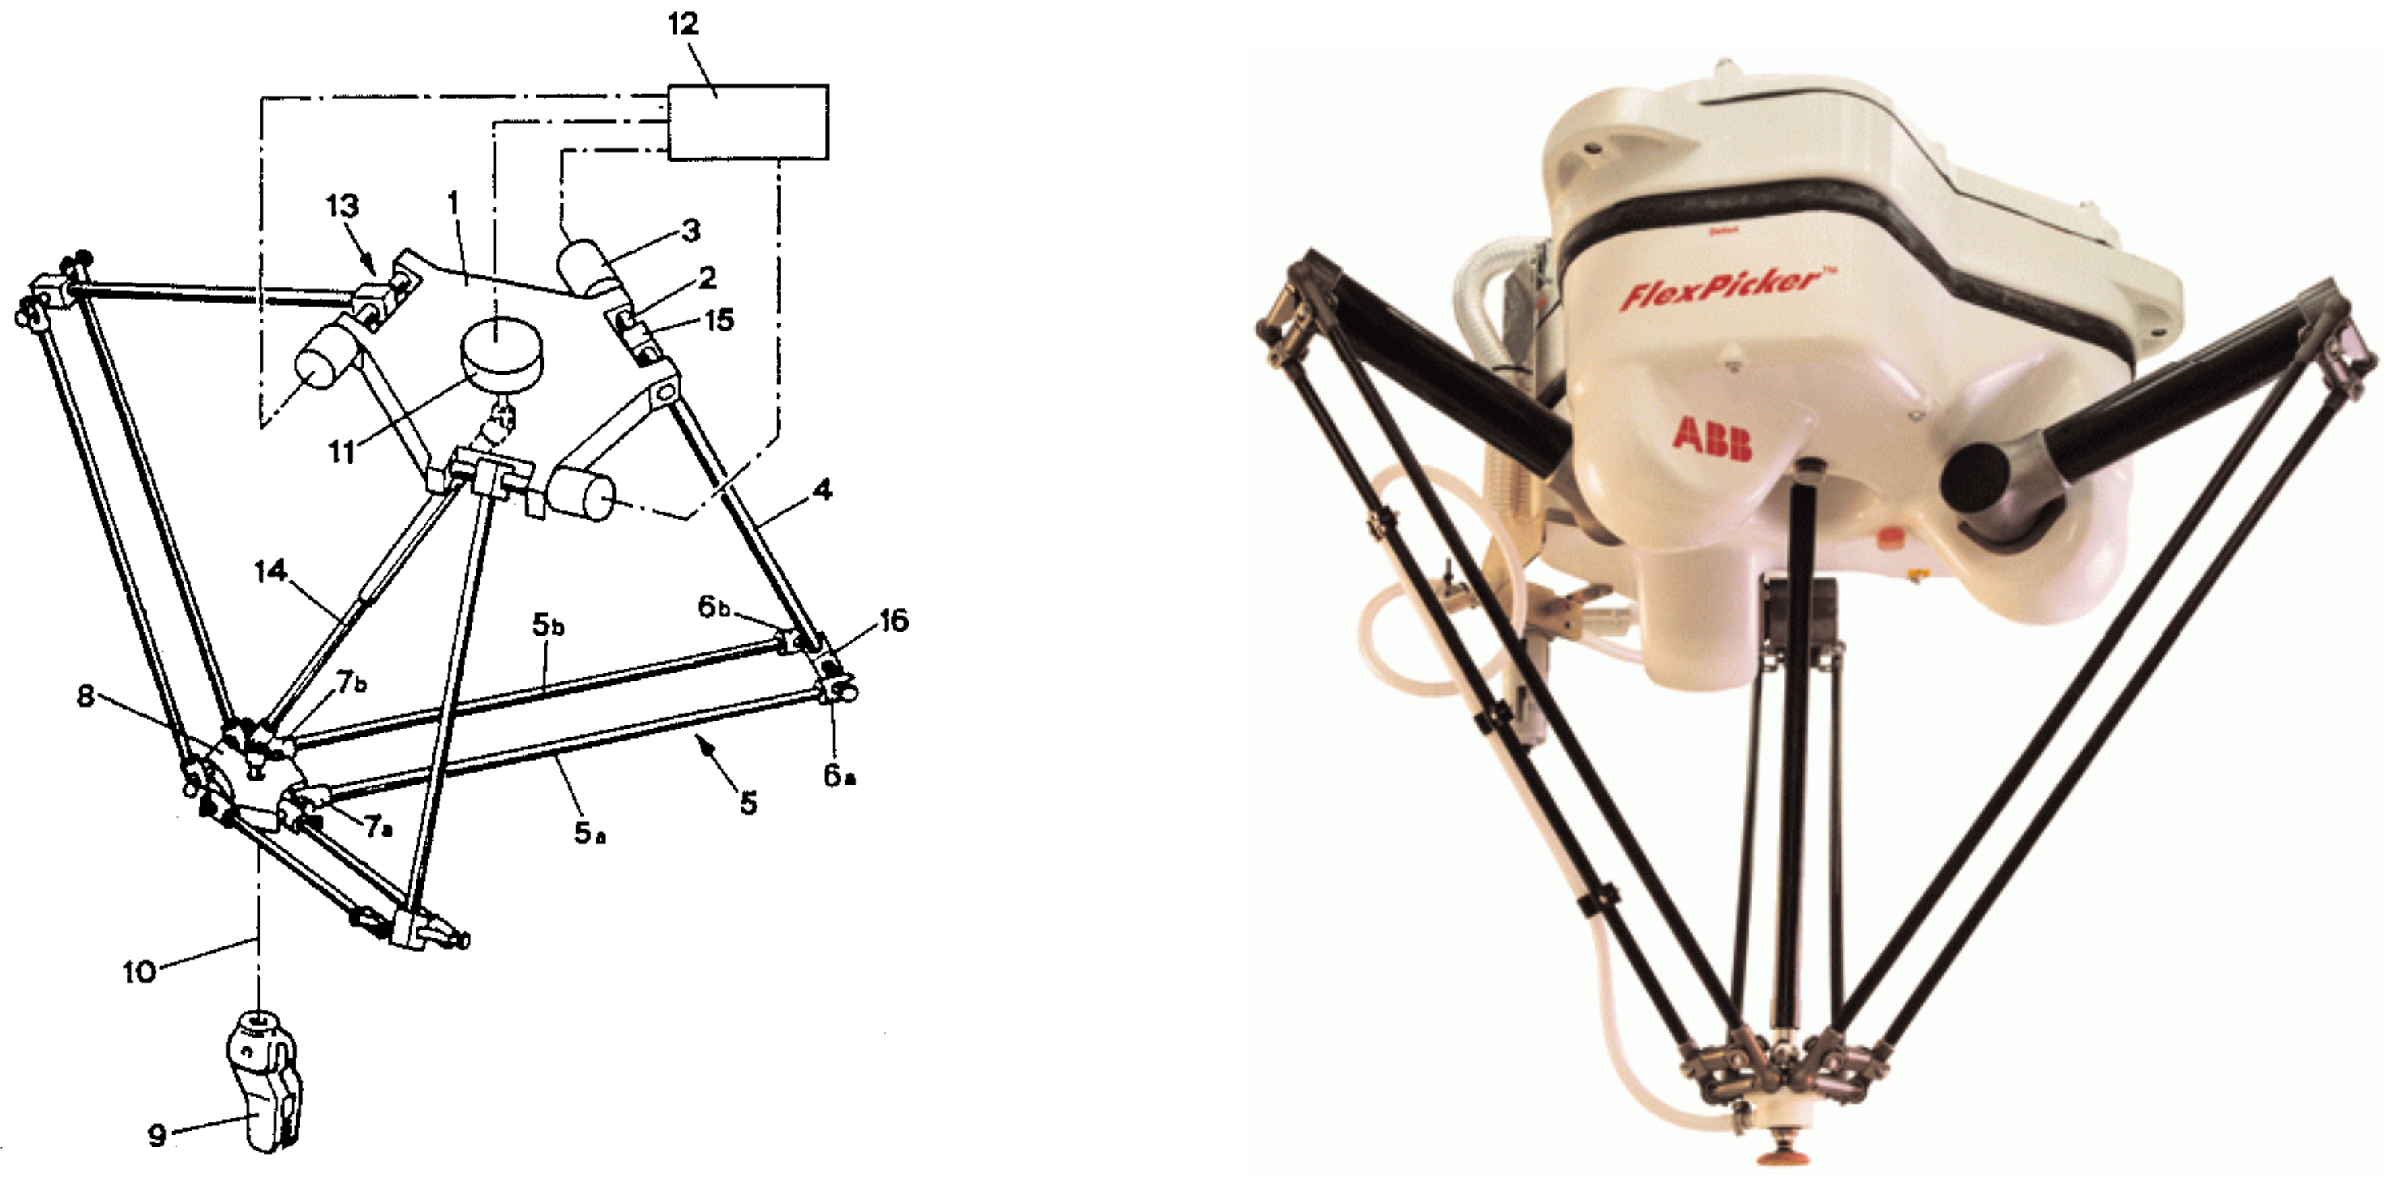 Engineering Proceedings | Free Full-Text | The 3D-Printed Low-Cost Delta  Robot &Oacute;scar: Technology Overview and Benchmarking | HTML